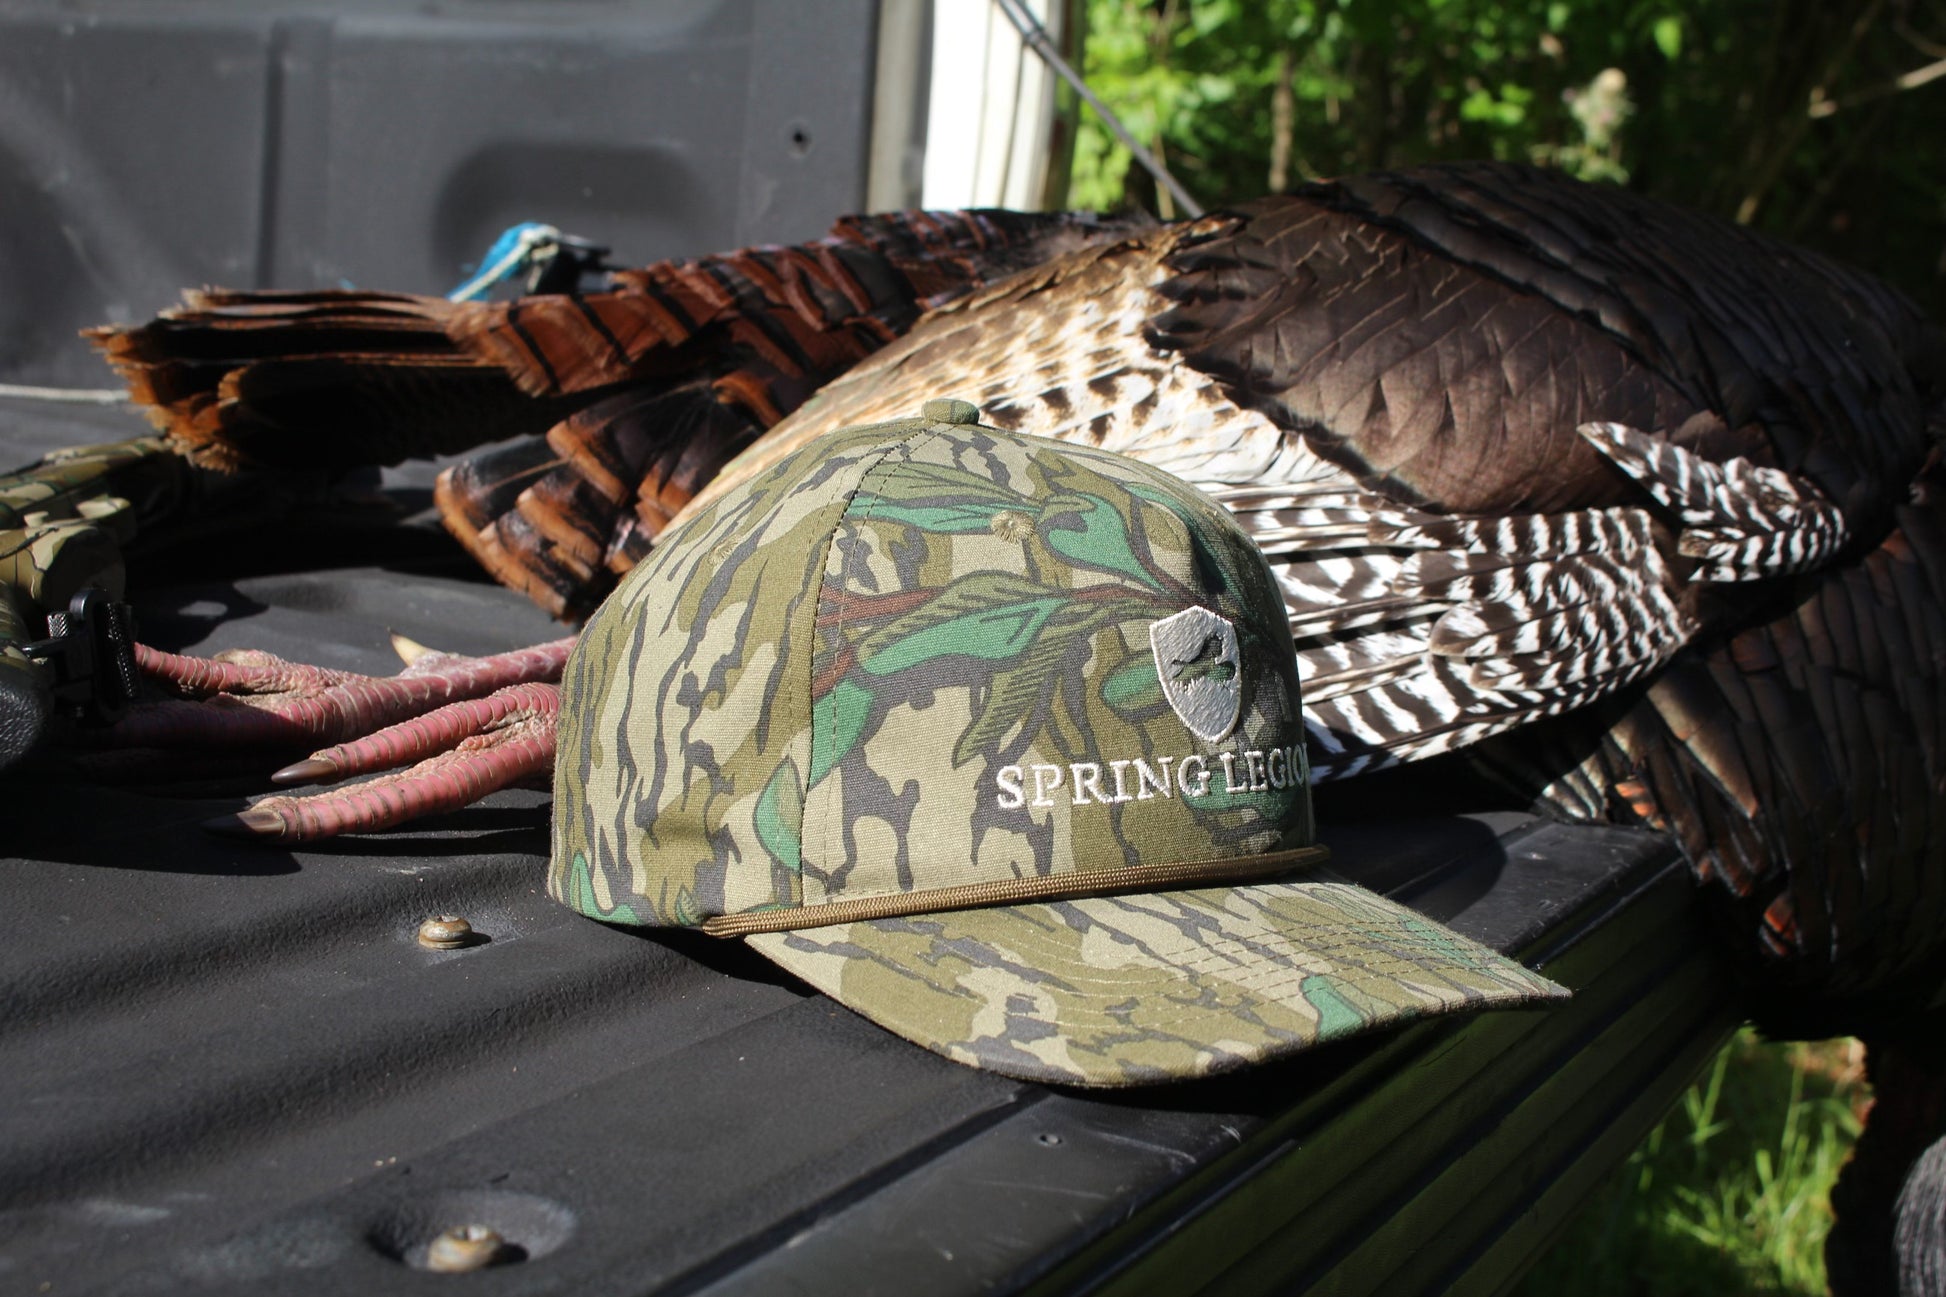 Greenleaf Rope Hat, mossy oak, spring legion, turkey hunting, panola, save the poults, brand, old school, outdoor, nwtf, turkeys for tomorrow, bottomland, lost 